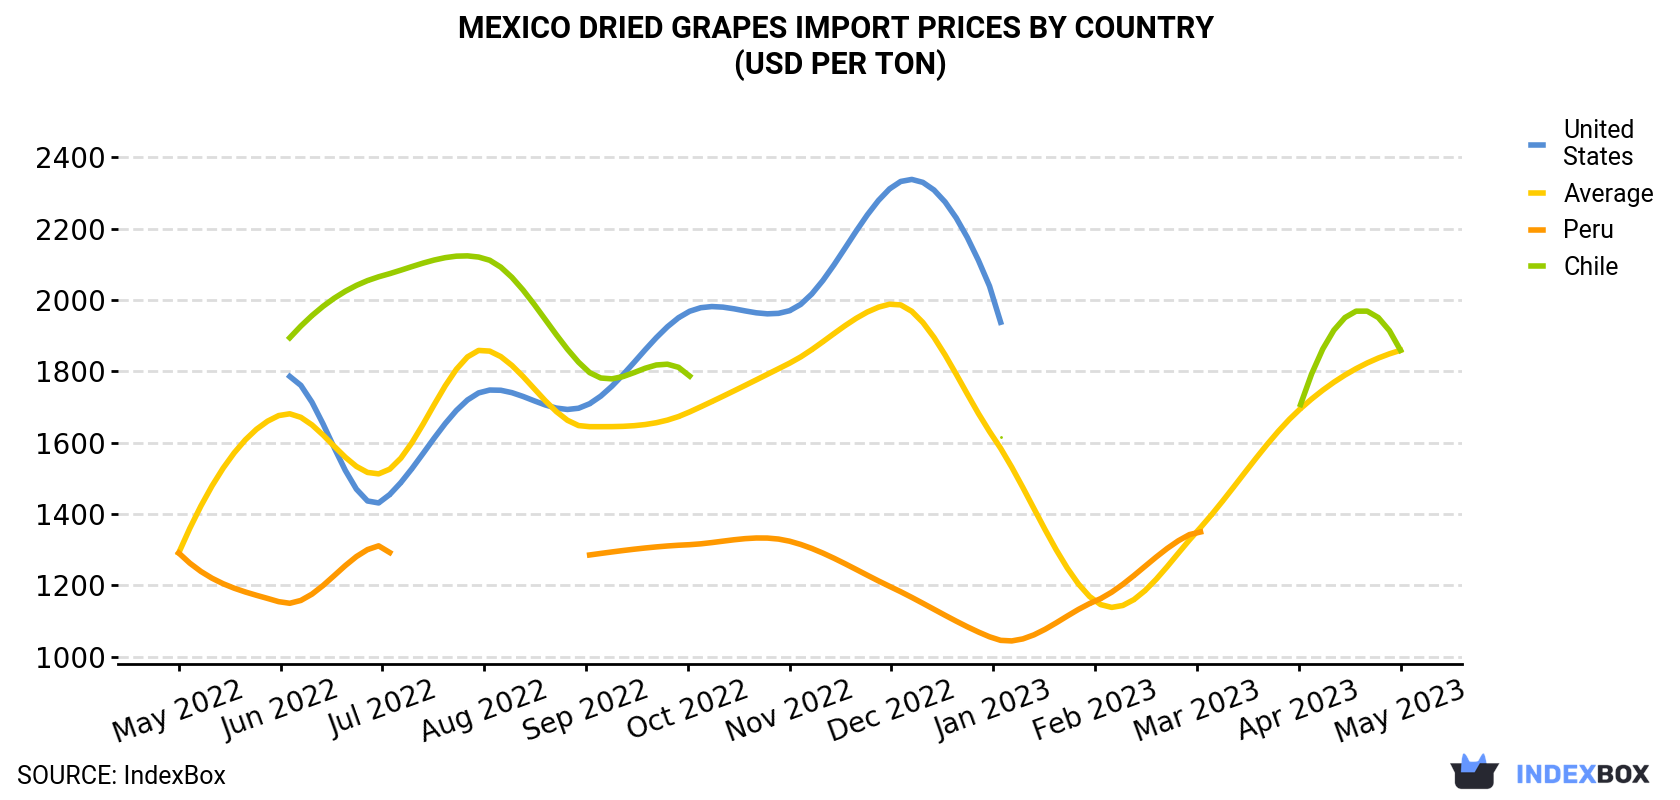 Mexico Dried Grapes Import Prices By Country (USD Per Ton)